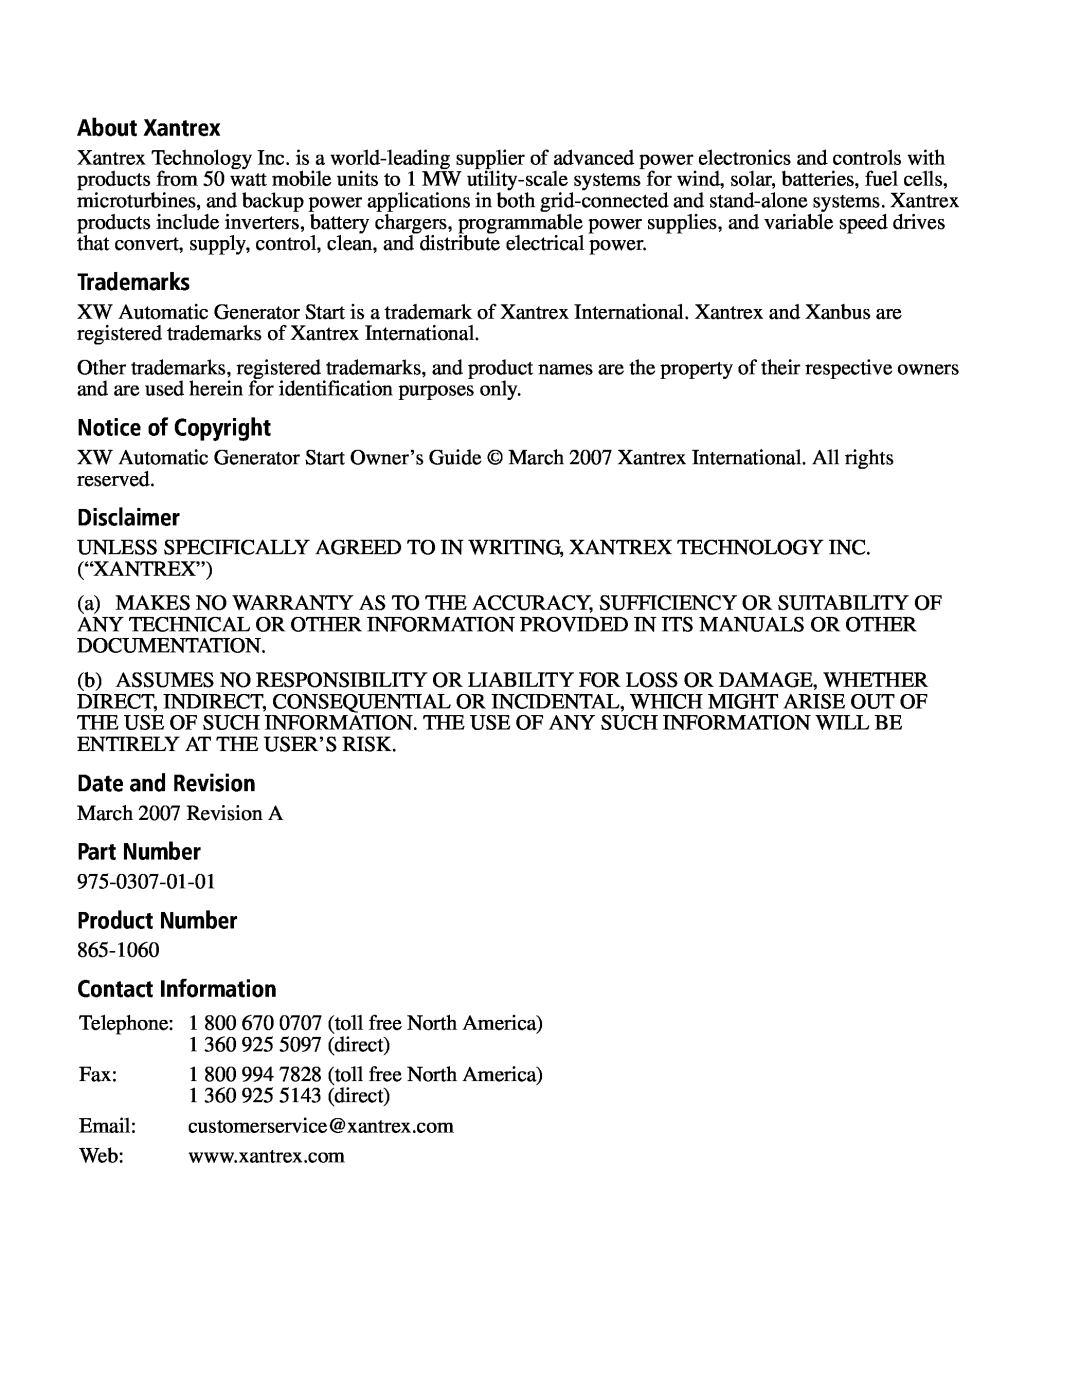 Xantrex Technology XW manual About Xantrex, Trademarks, Notice of Copyright, Disclaimer, Date and Revision, Part Number 